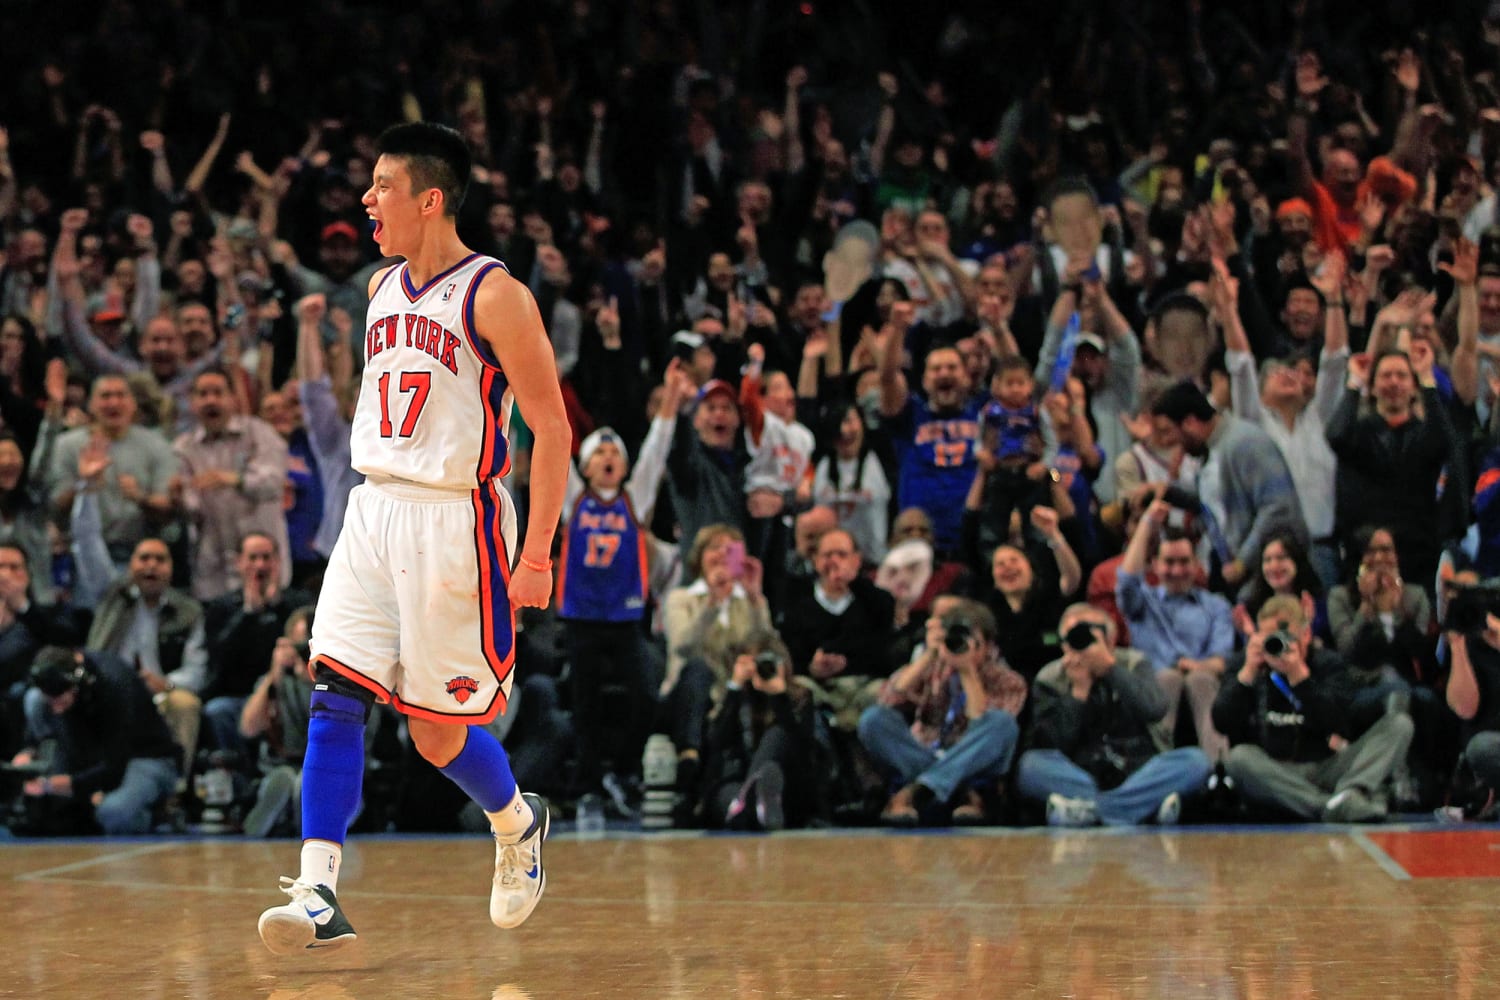 koppel Digitaal automaat Jeremy Lin reflects on 'Linsanity' 10 years later, gets candid about 'big  regret'